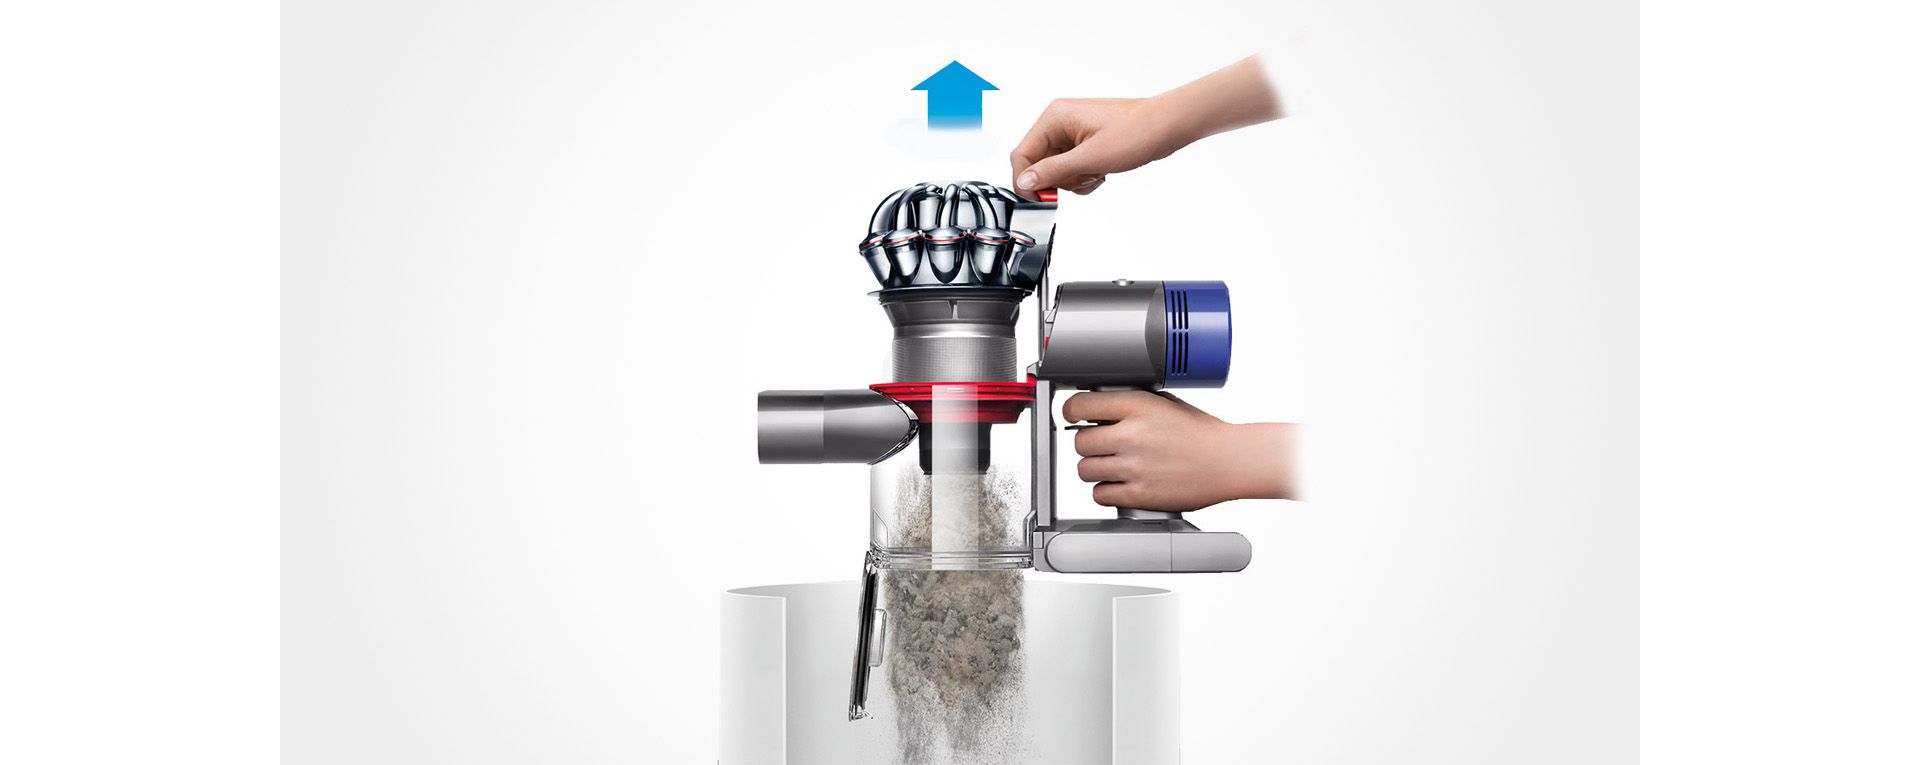 Support and How to for Dyson V8™ Vacuum | Dyson NZ